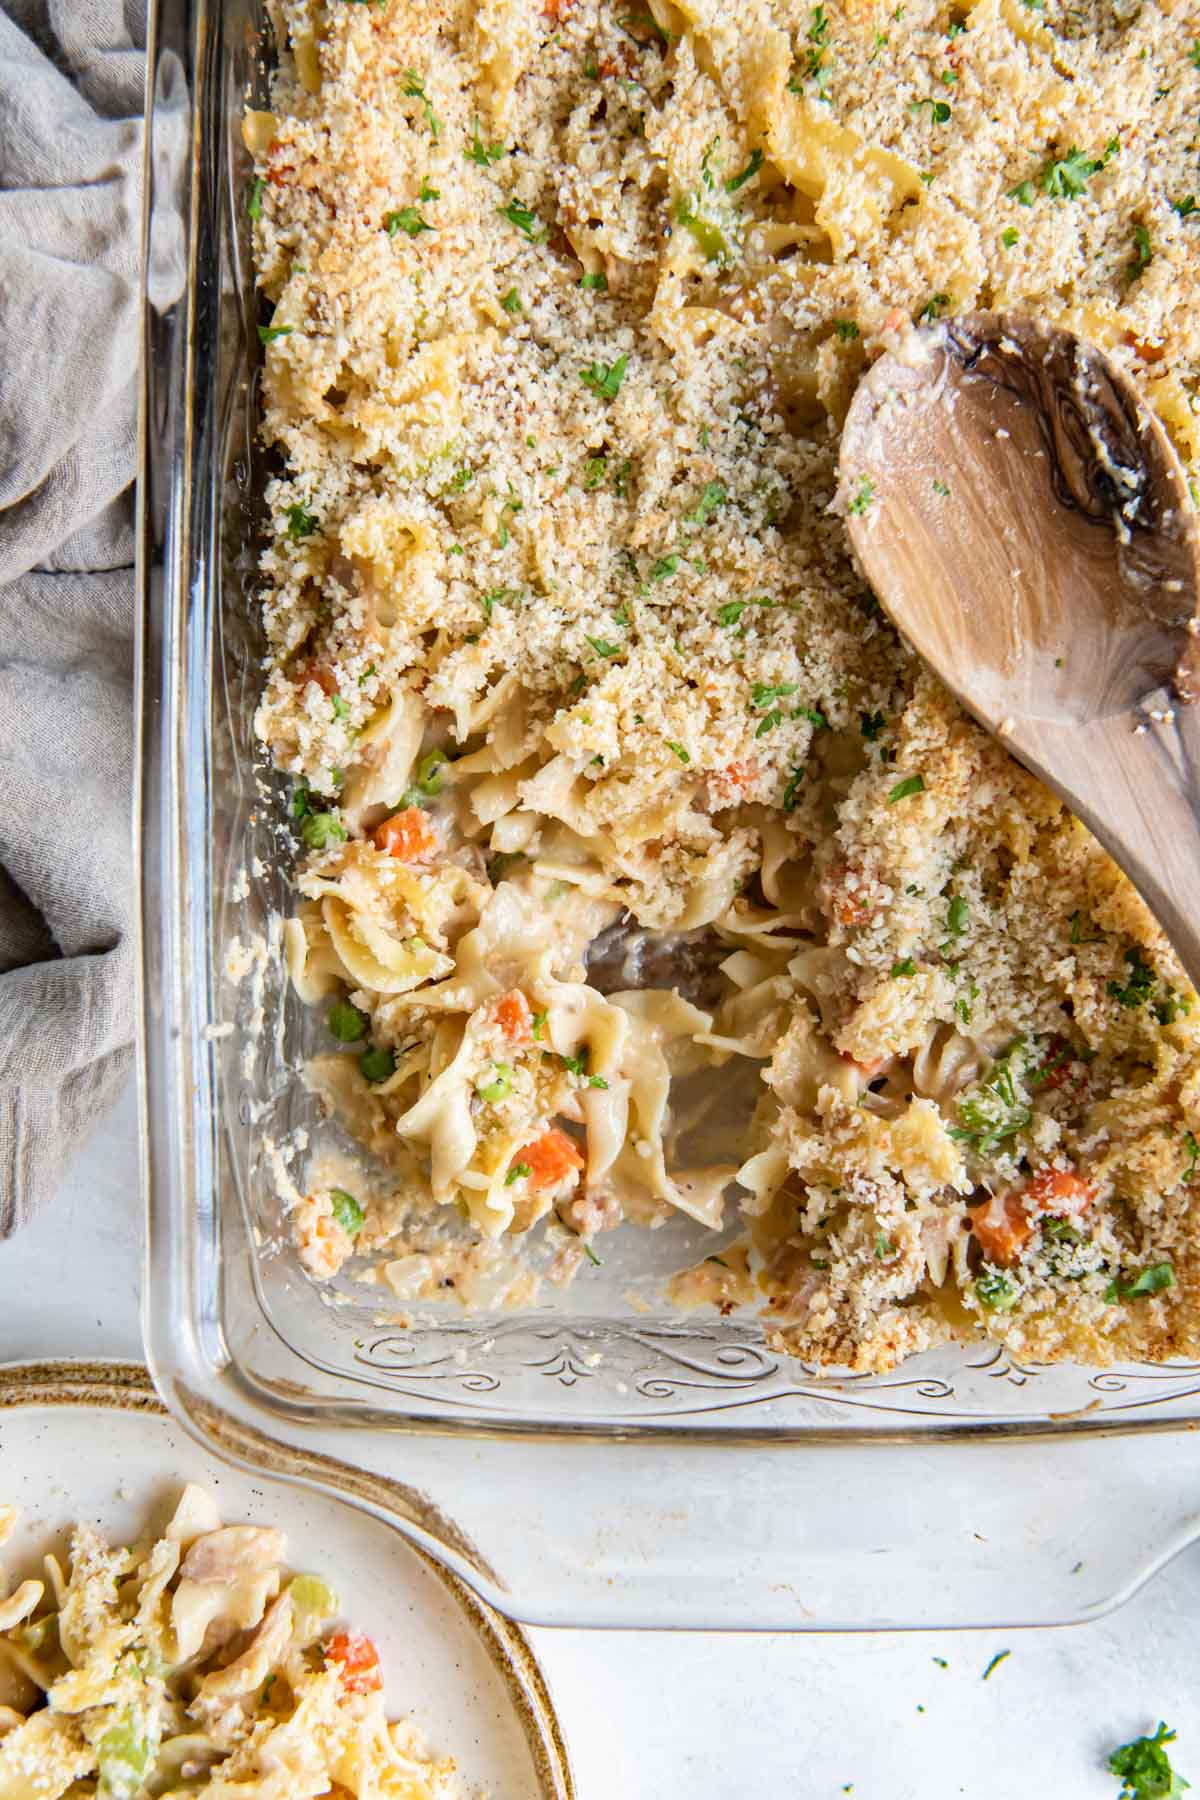 Tuna casserole in a baking dish with a wooden spoon.